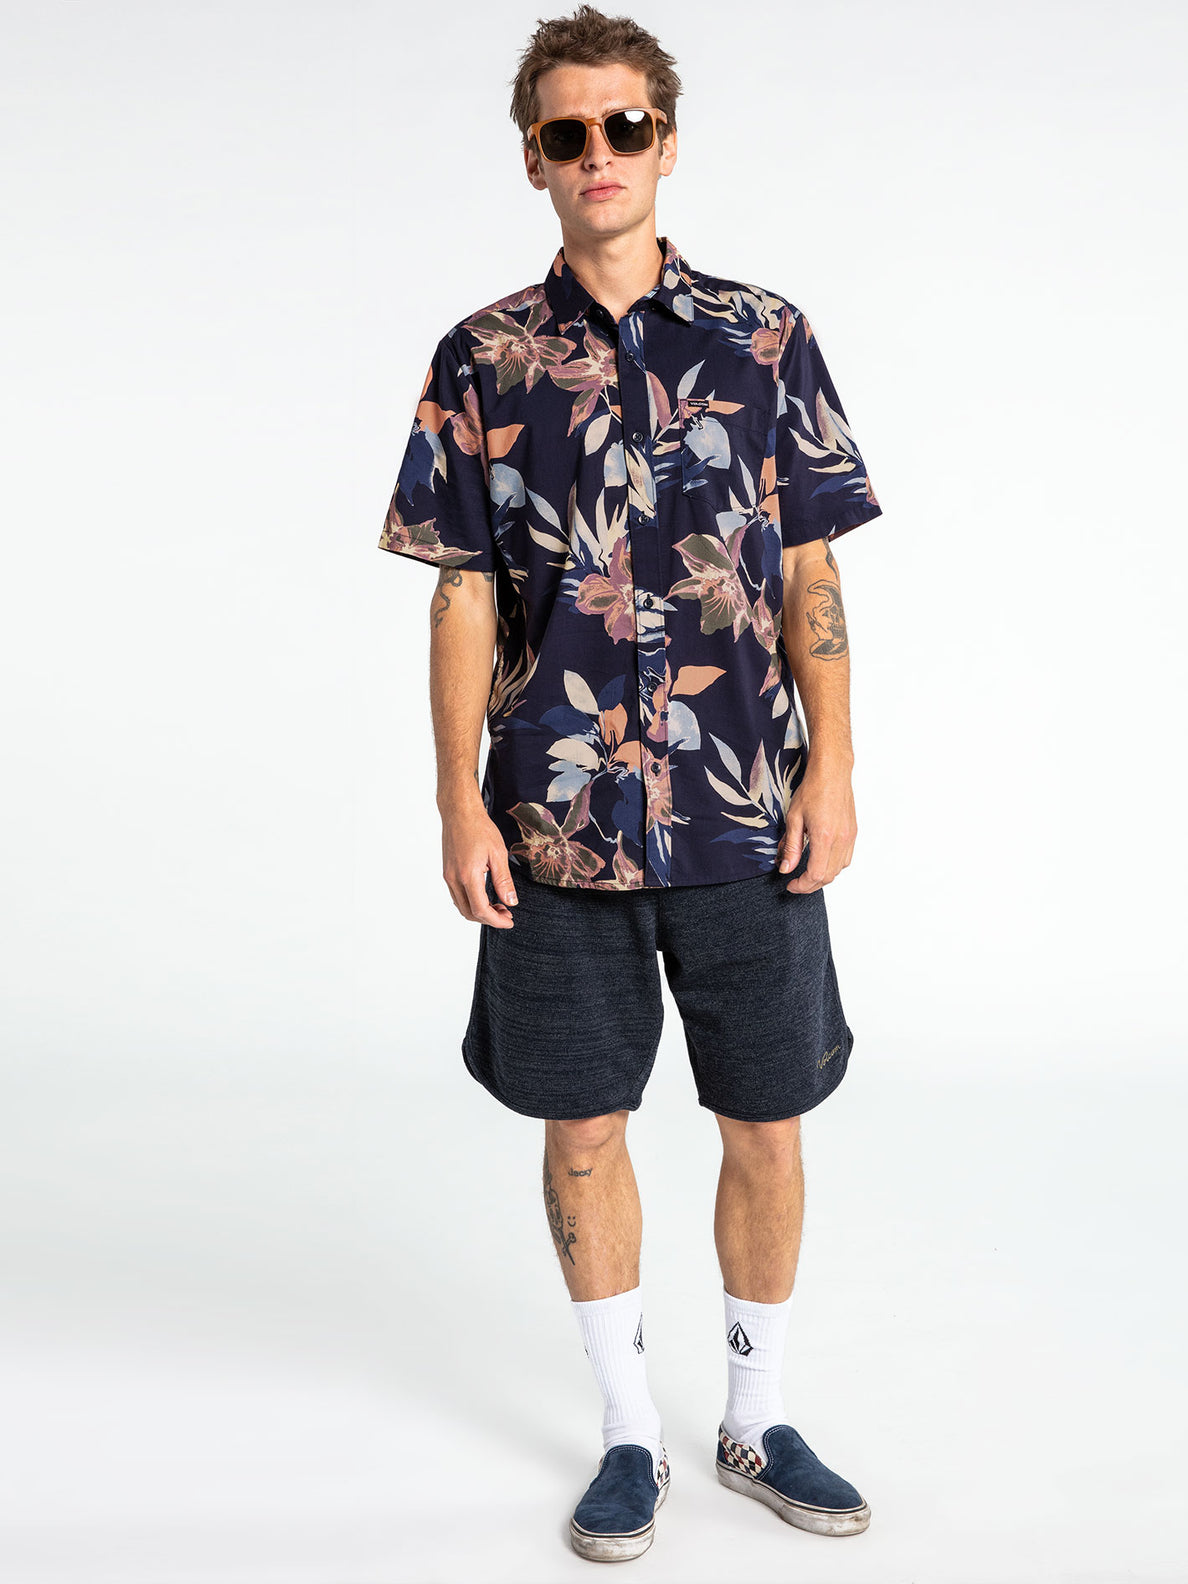 Marble Floral Short Sleeve Shirt - Navy (A0442105_NVY) [1]